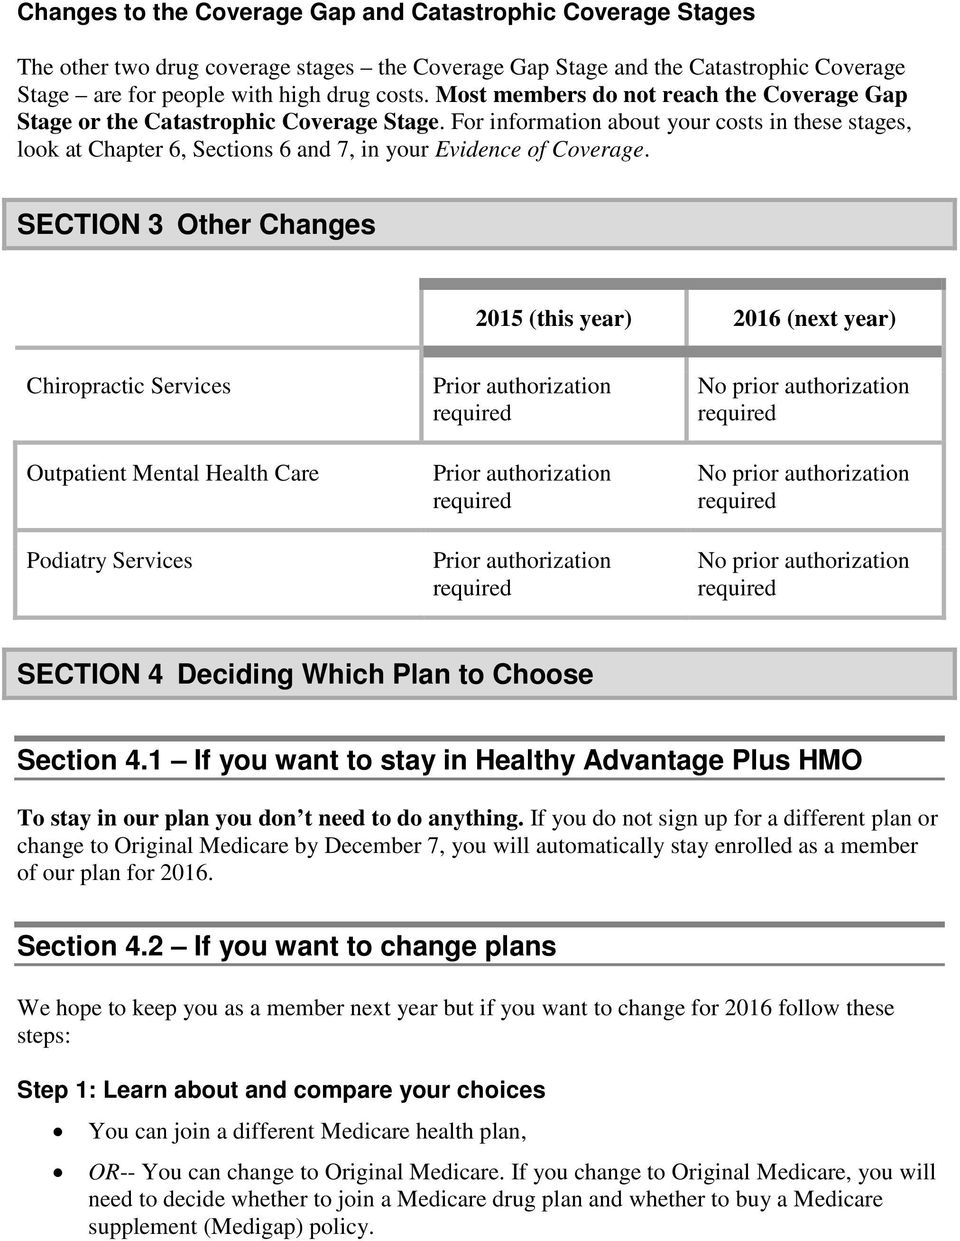 For information about your costs in these stages, look at Chapter 6, Sections 6 and 7, in your Evidence of Coverage.